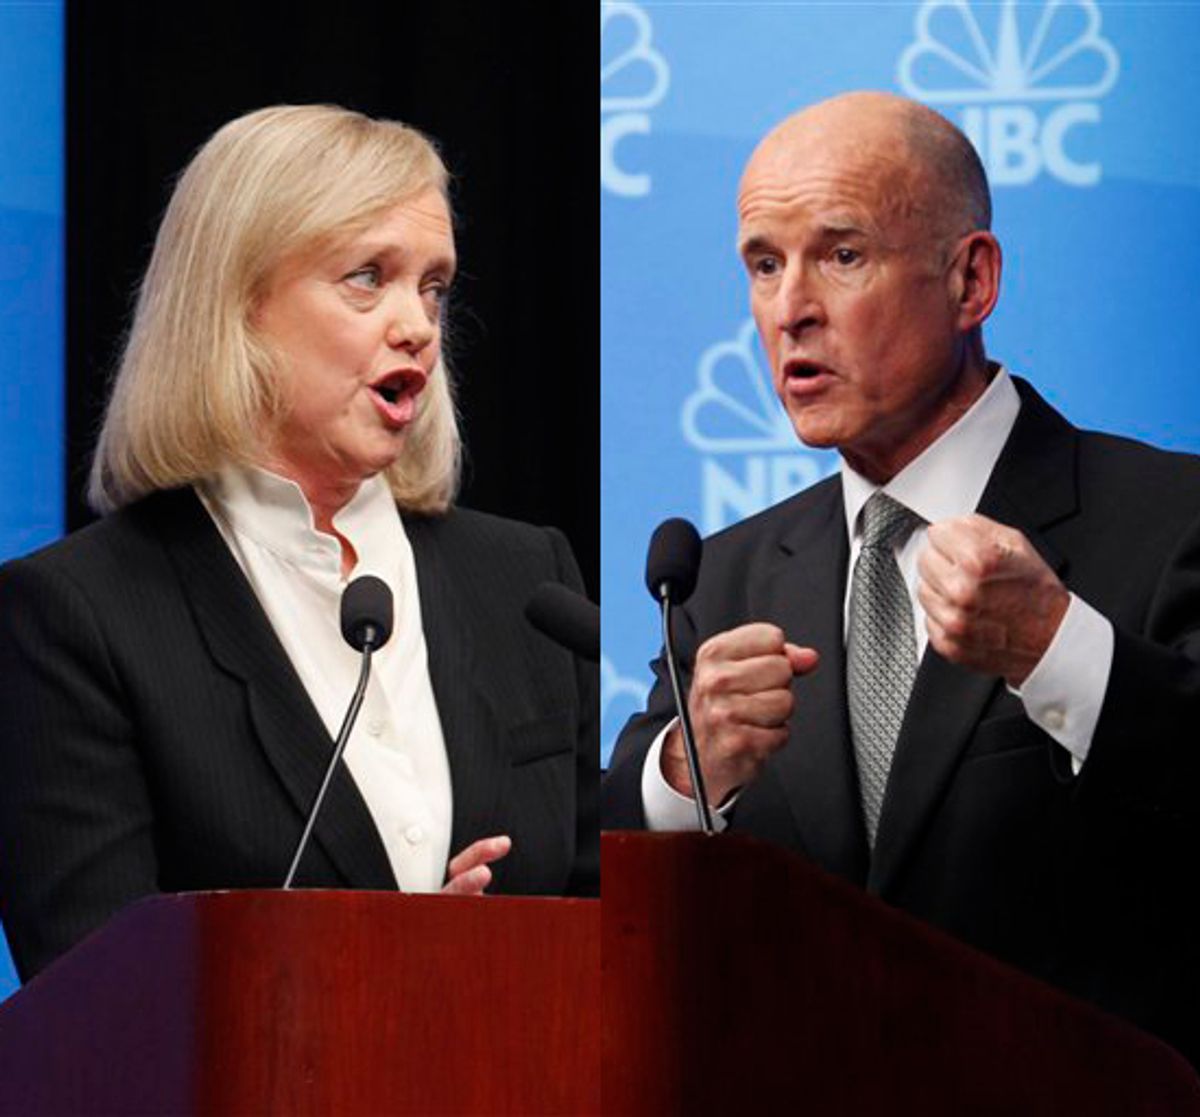 Republican Meg Whitman debates against Democrat Jerry Brown at Dominican University of California in San Rafael, Calif., Tuesday, Oct. 12, 2010 for their third and final debate. Brown is California Attorney General. Whitman is former CEO of eBay. (AP Photo/Rich Pedroncelli, pool) (Rich Pedroncelli)